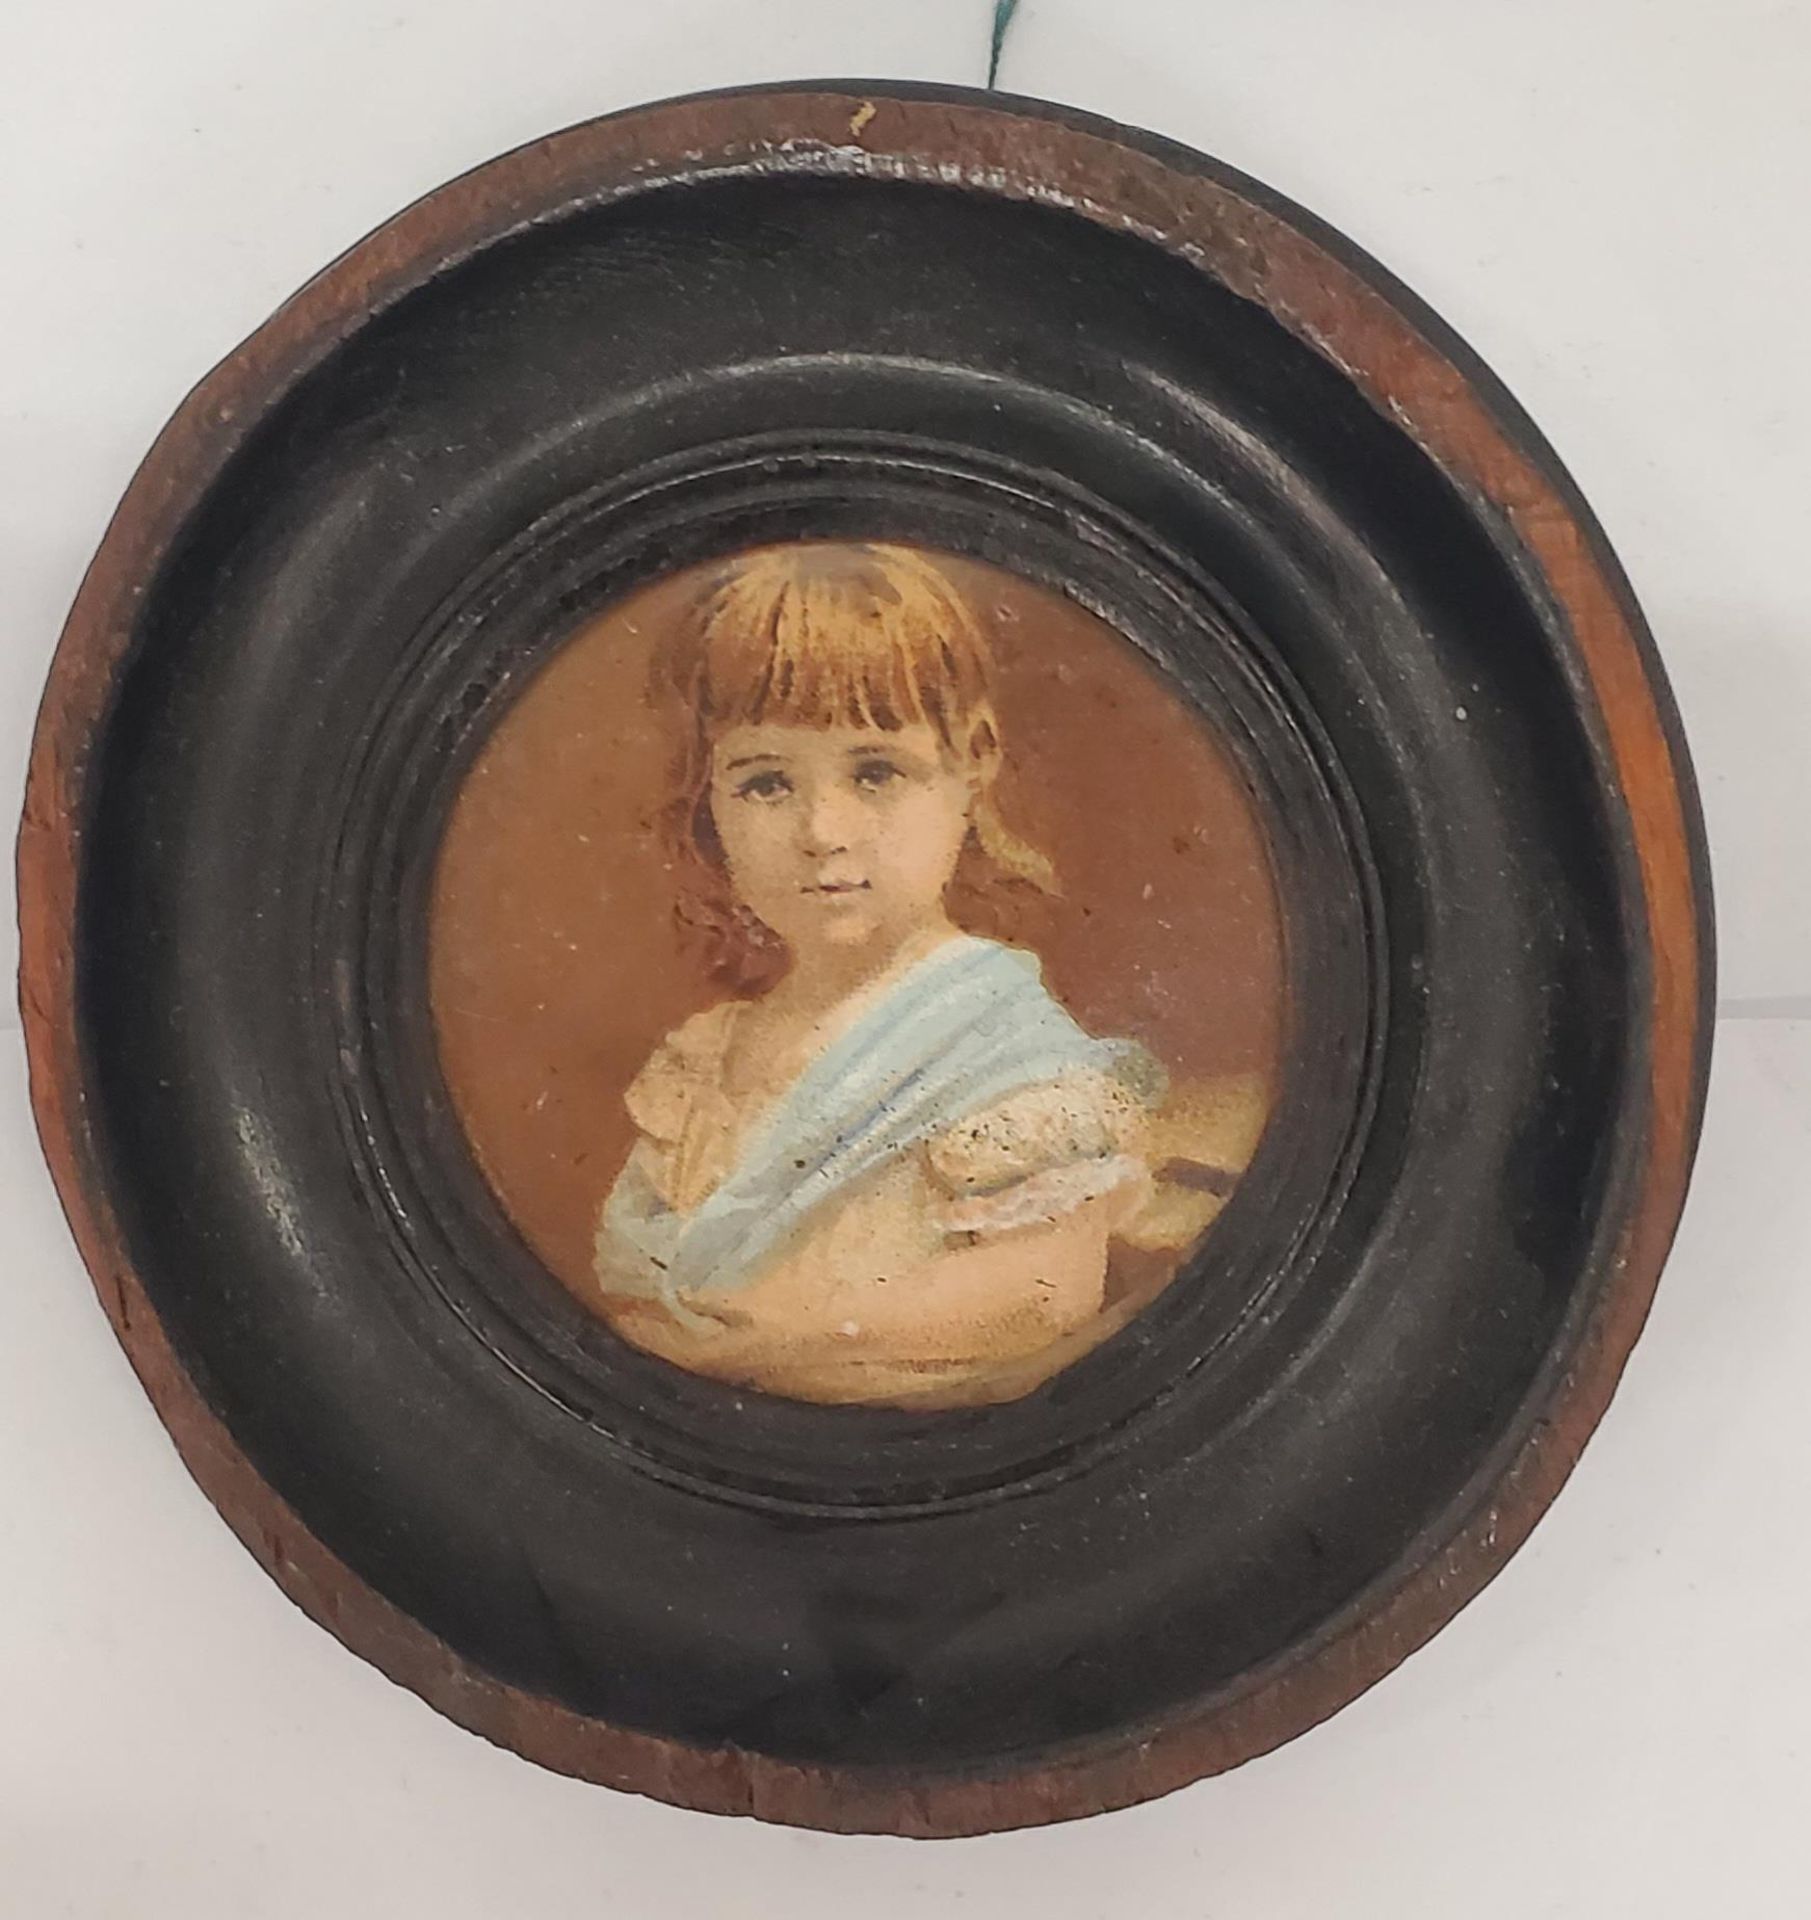 TWO VINTAGE MINIATURE PORTRAITS IN ROUND FRAMES - Image 2 of 5